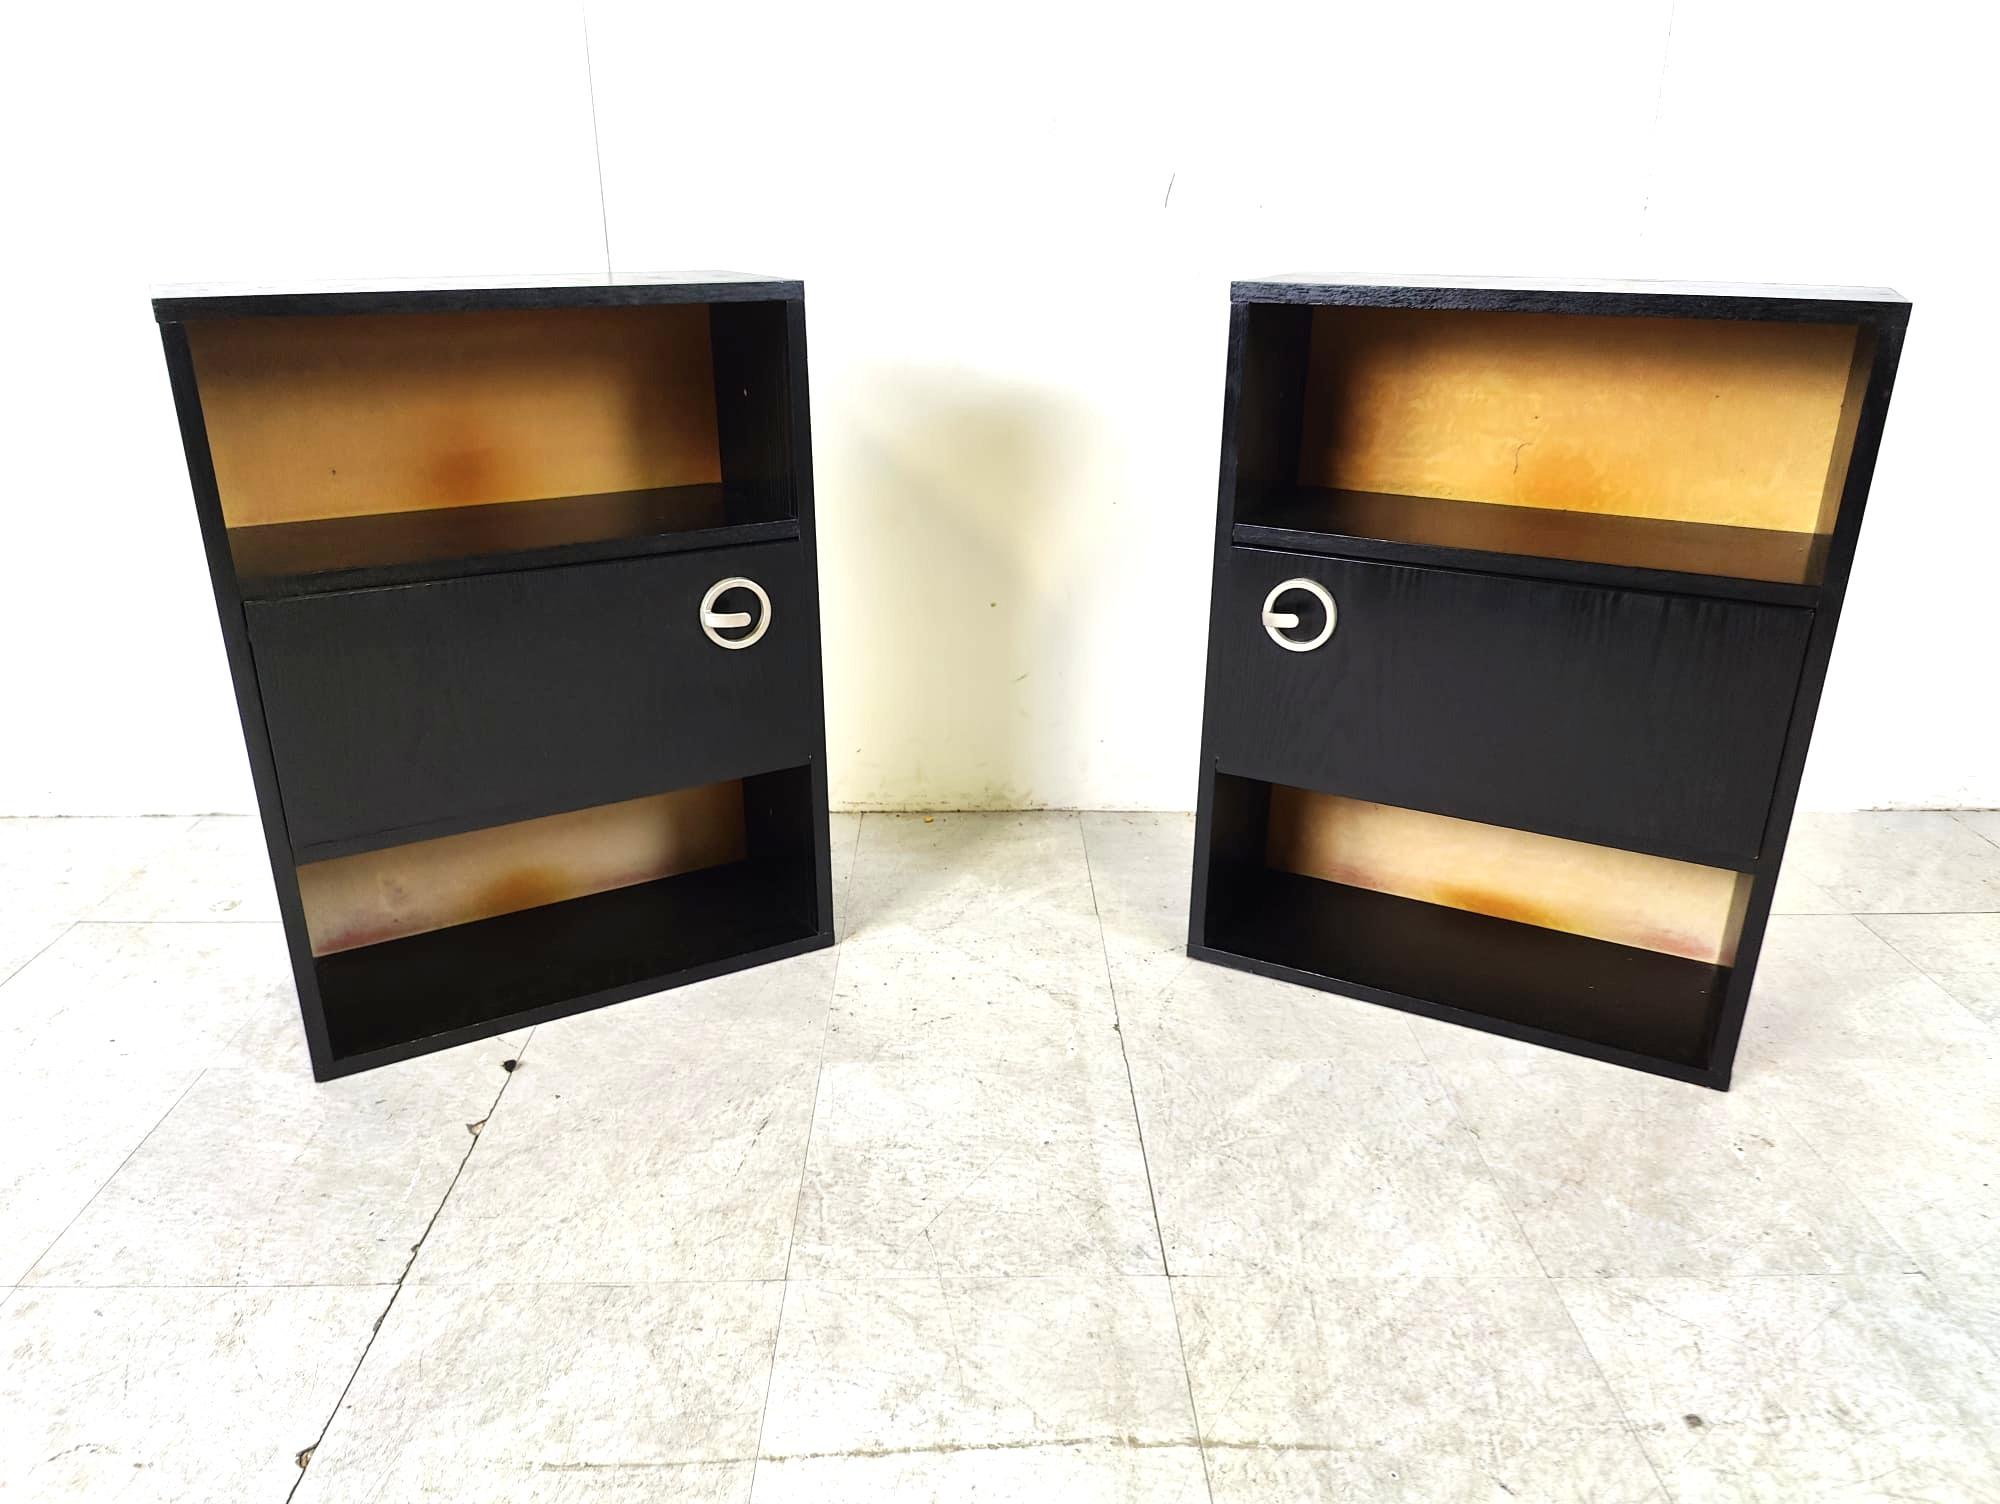 Pair of black wooden seventies bedside cabinets.

The cabinets have cool handles. 

1970s - Belgium

Good condition

Dimensions:
Height: 73cm
Width: 55cm
Depth: 25cm

Ref.: 6425152